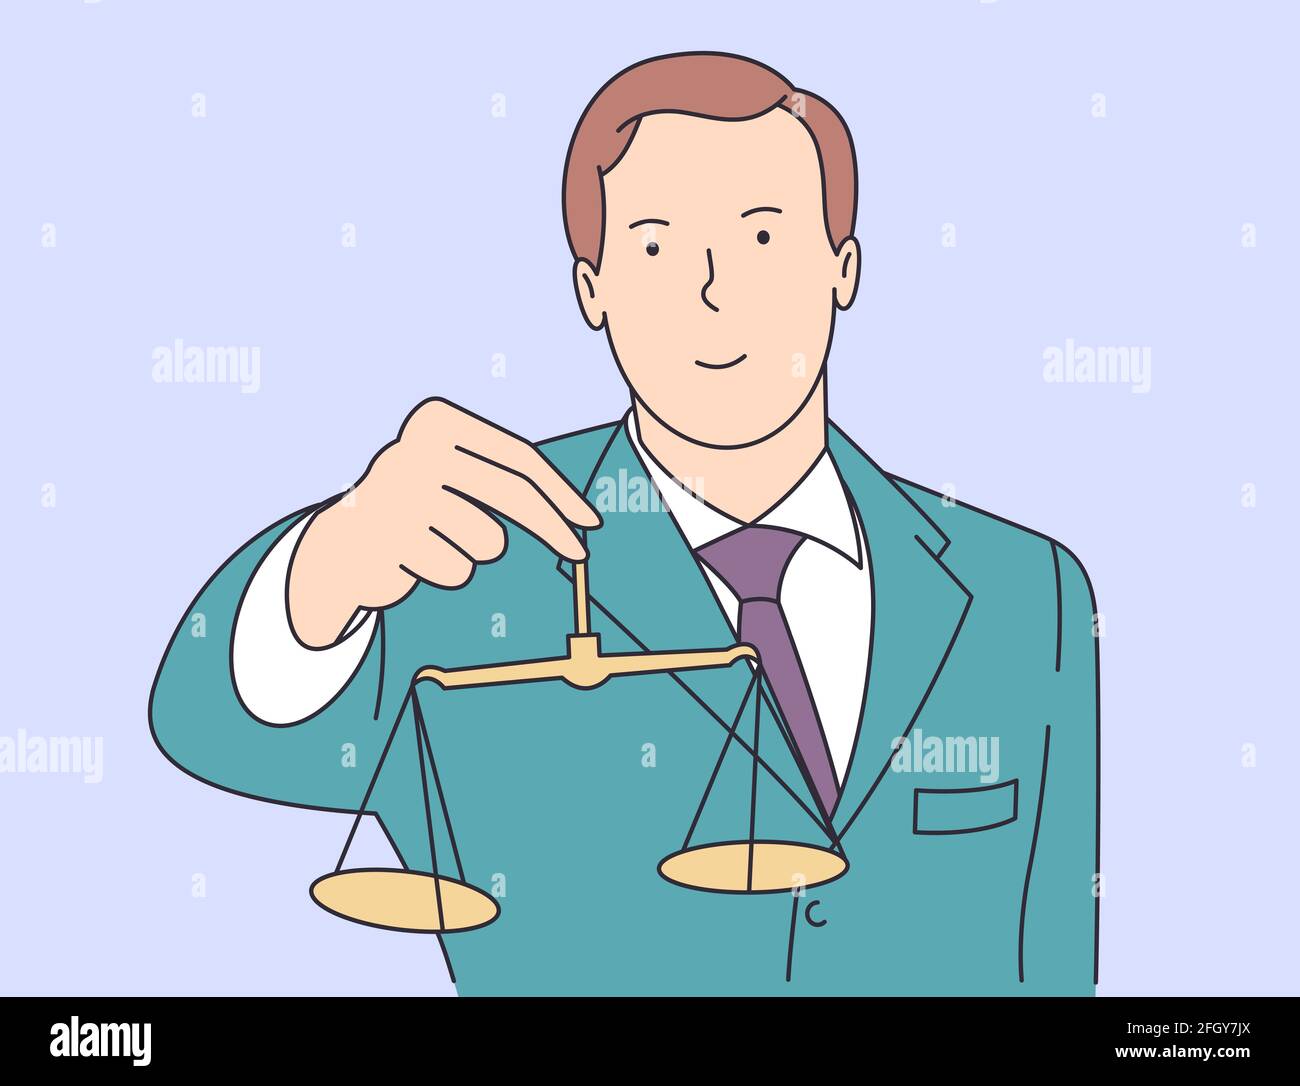 judger-stock-vector-images-alamy